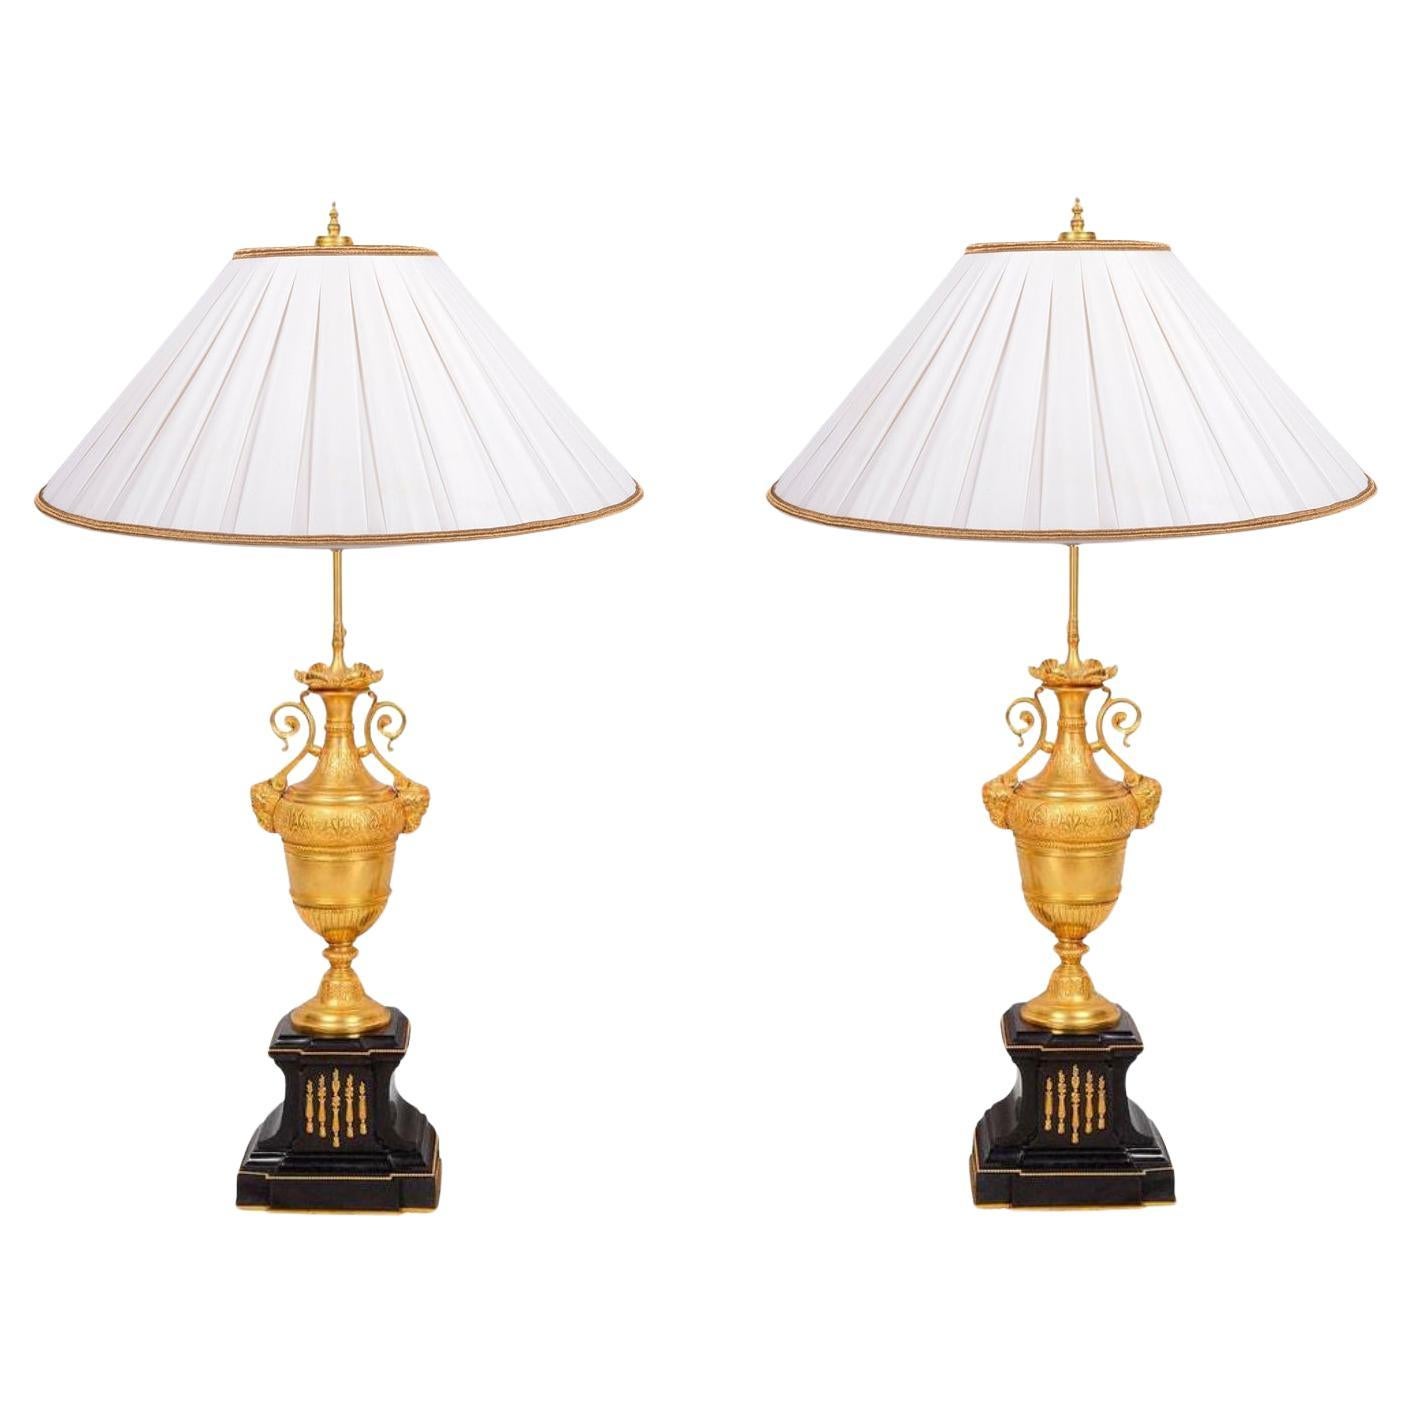 Pair of Classical 19th Century Gilded Lamps For Sale